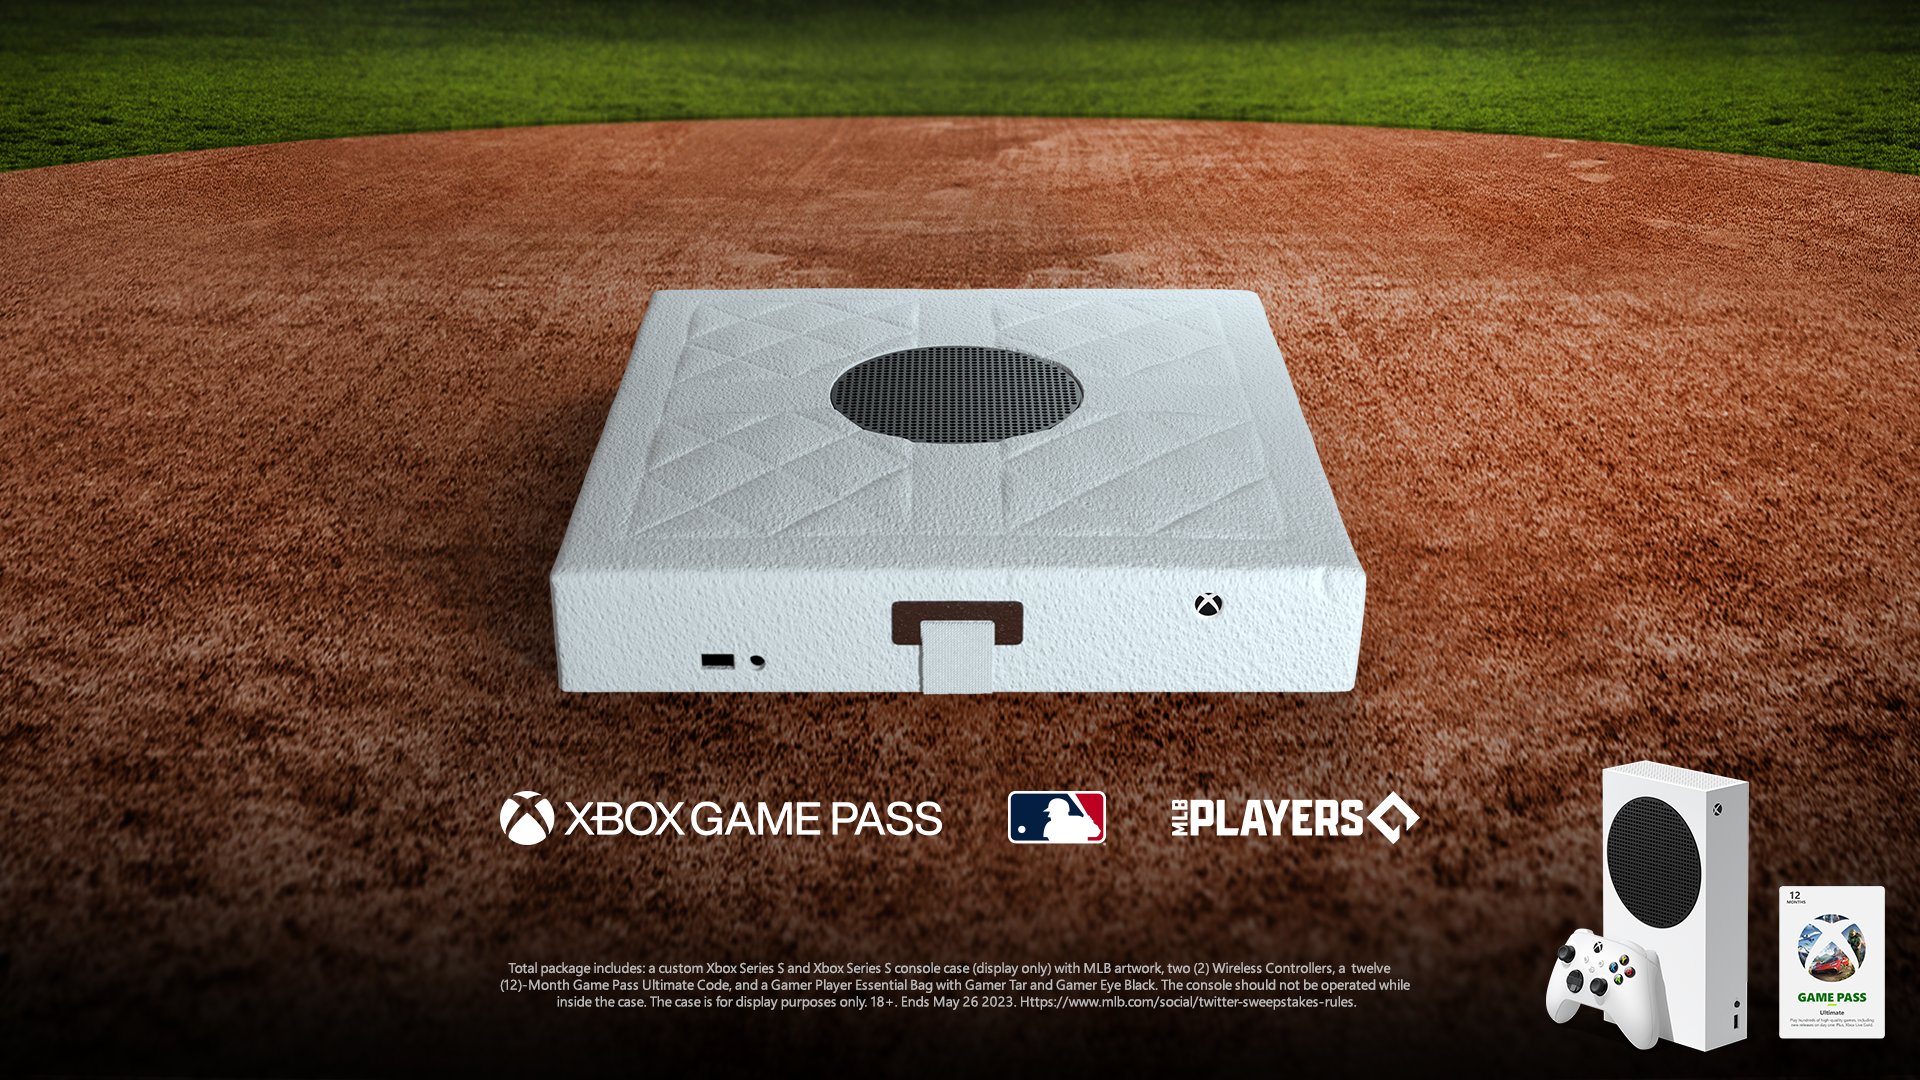 Sony to publish PlayStation exclusive baseball game on Xbox  Metro News